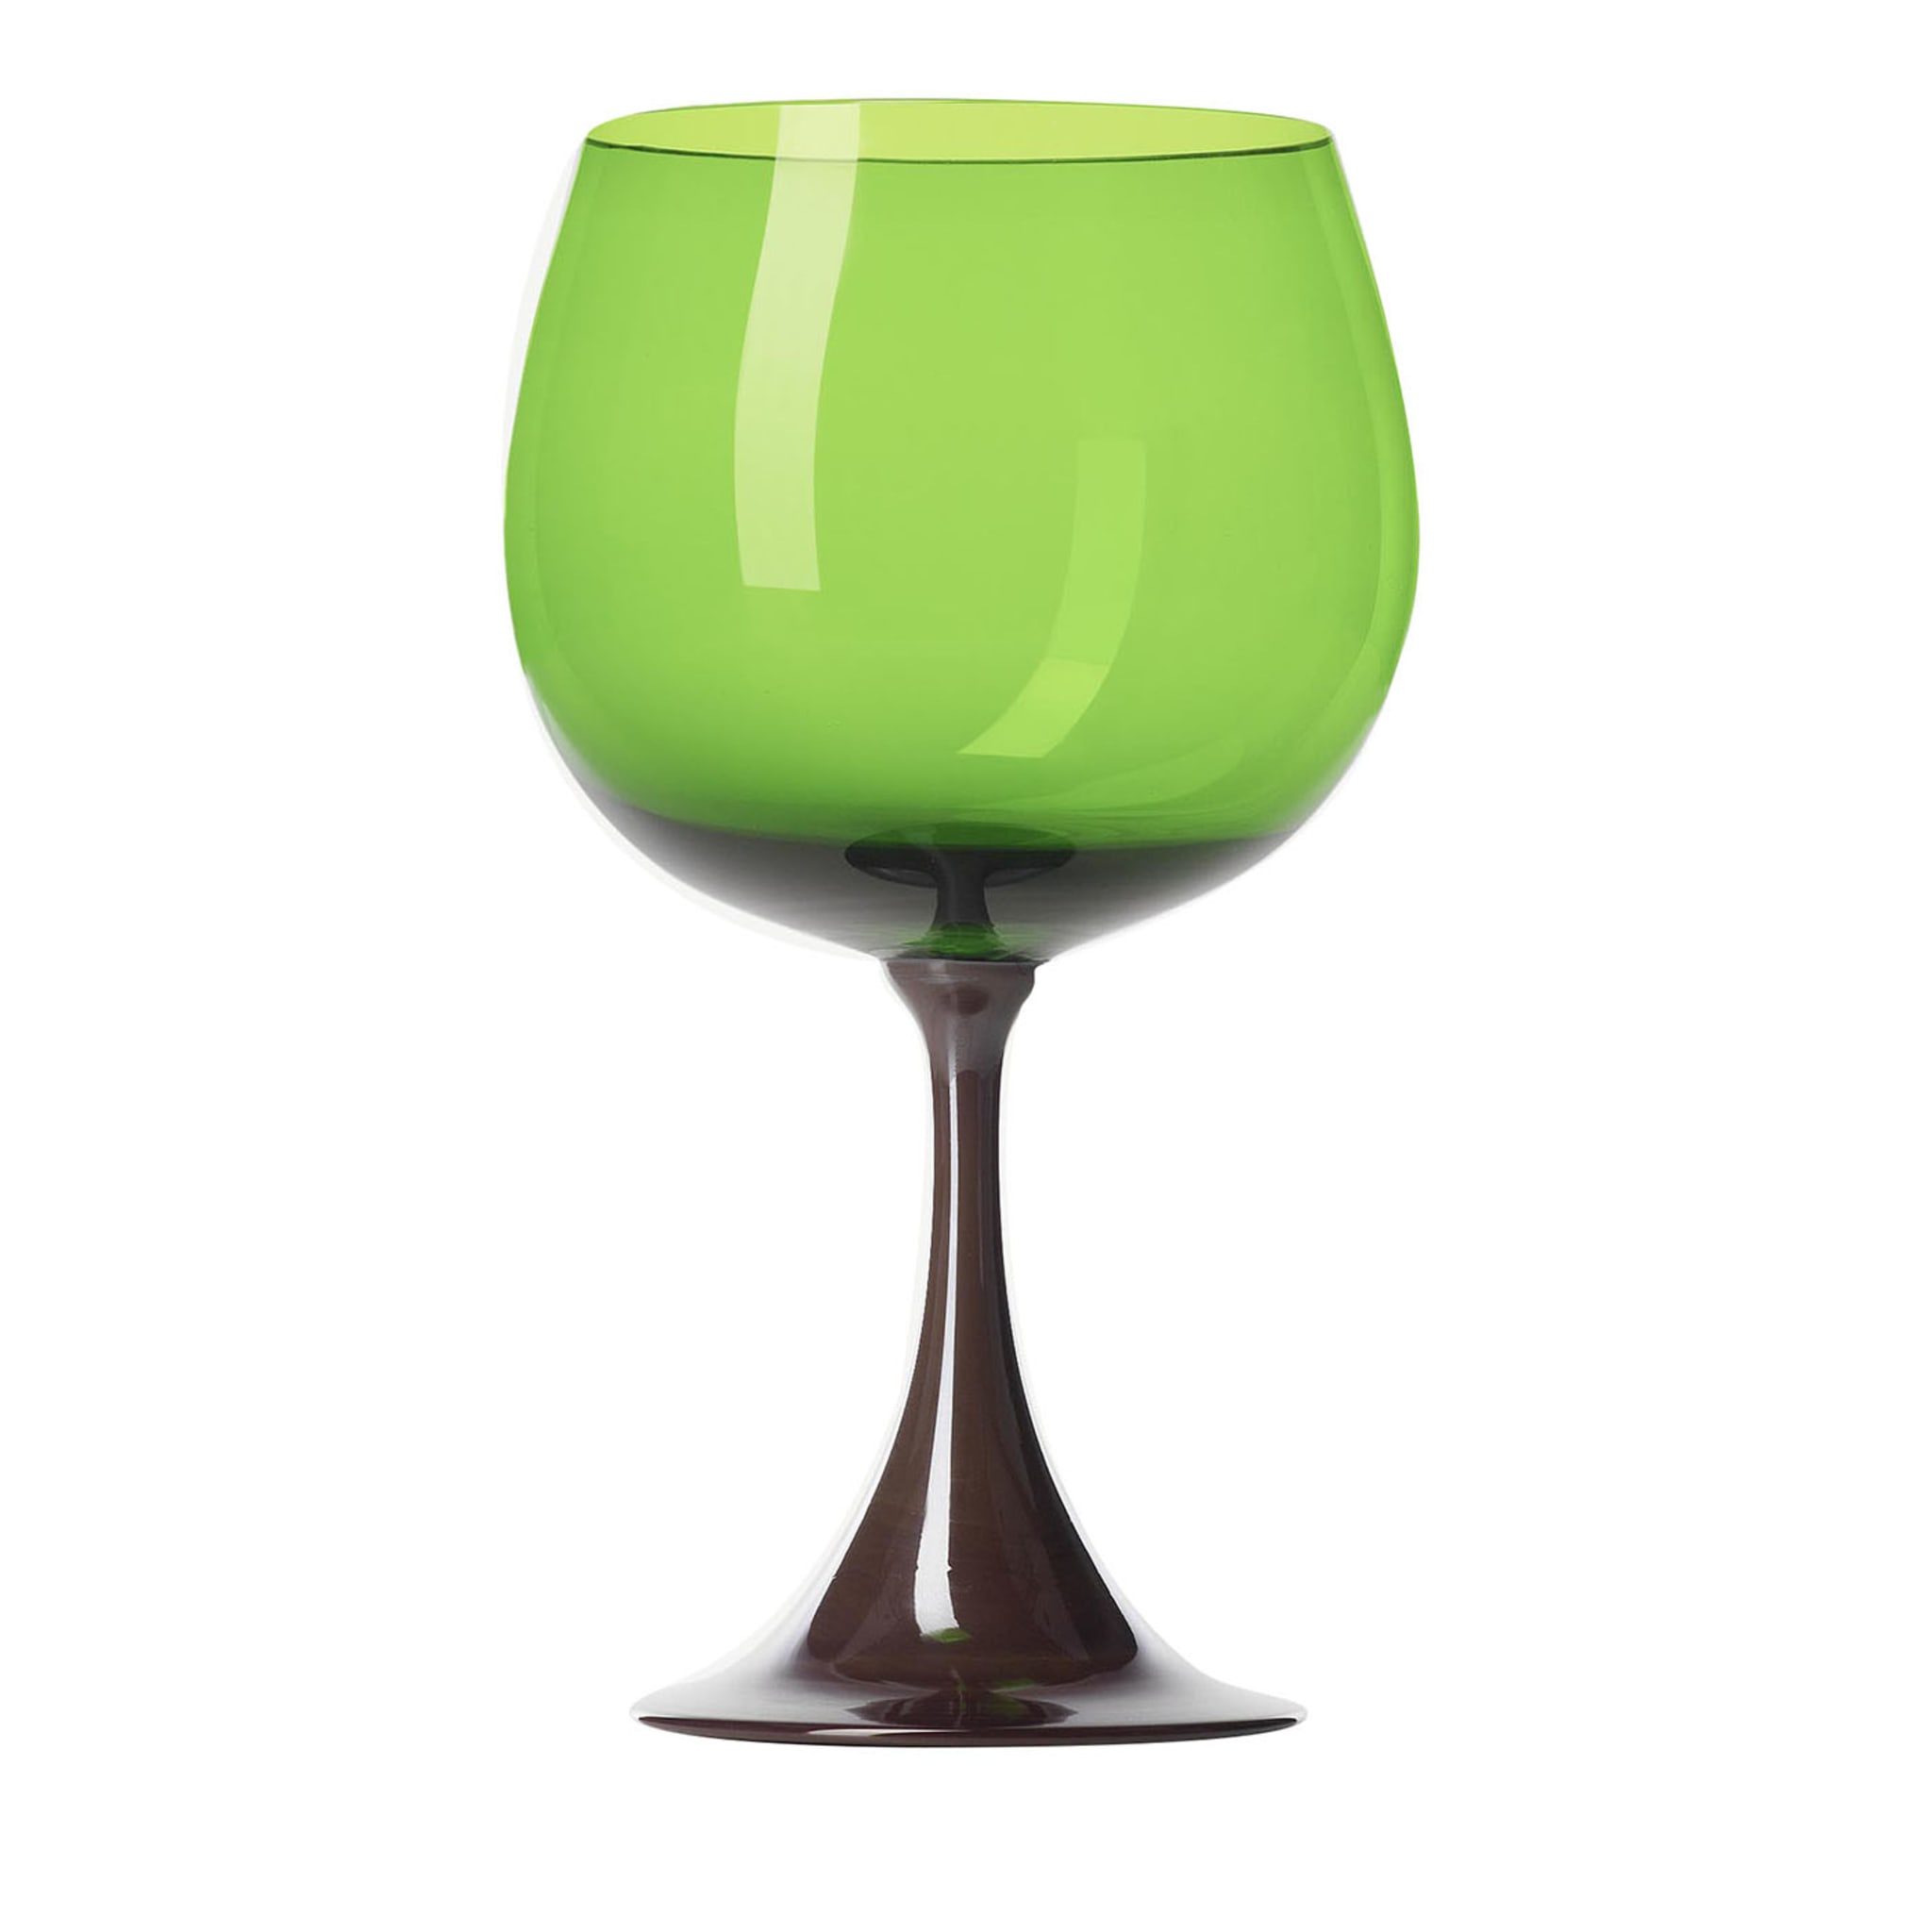 Burlesque Green & Blueberry Stem Glass by Stefano Marcato - Main view